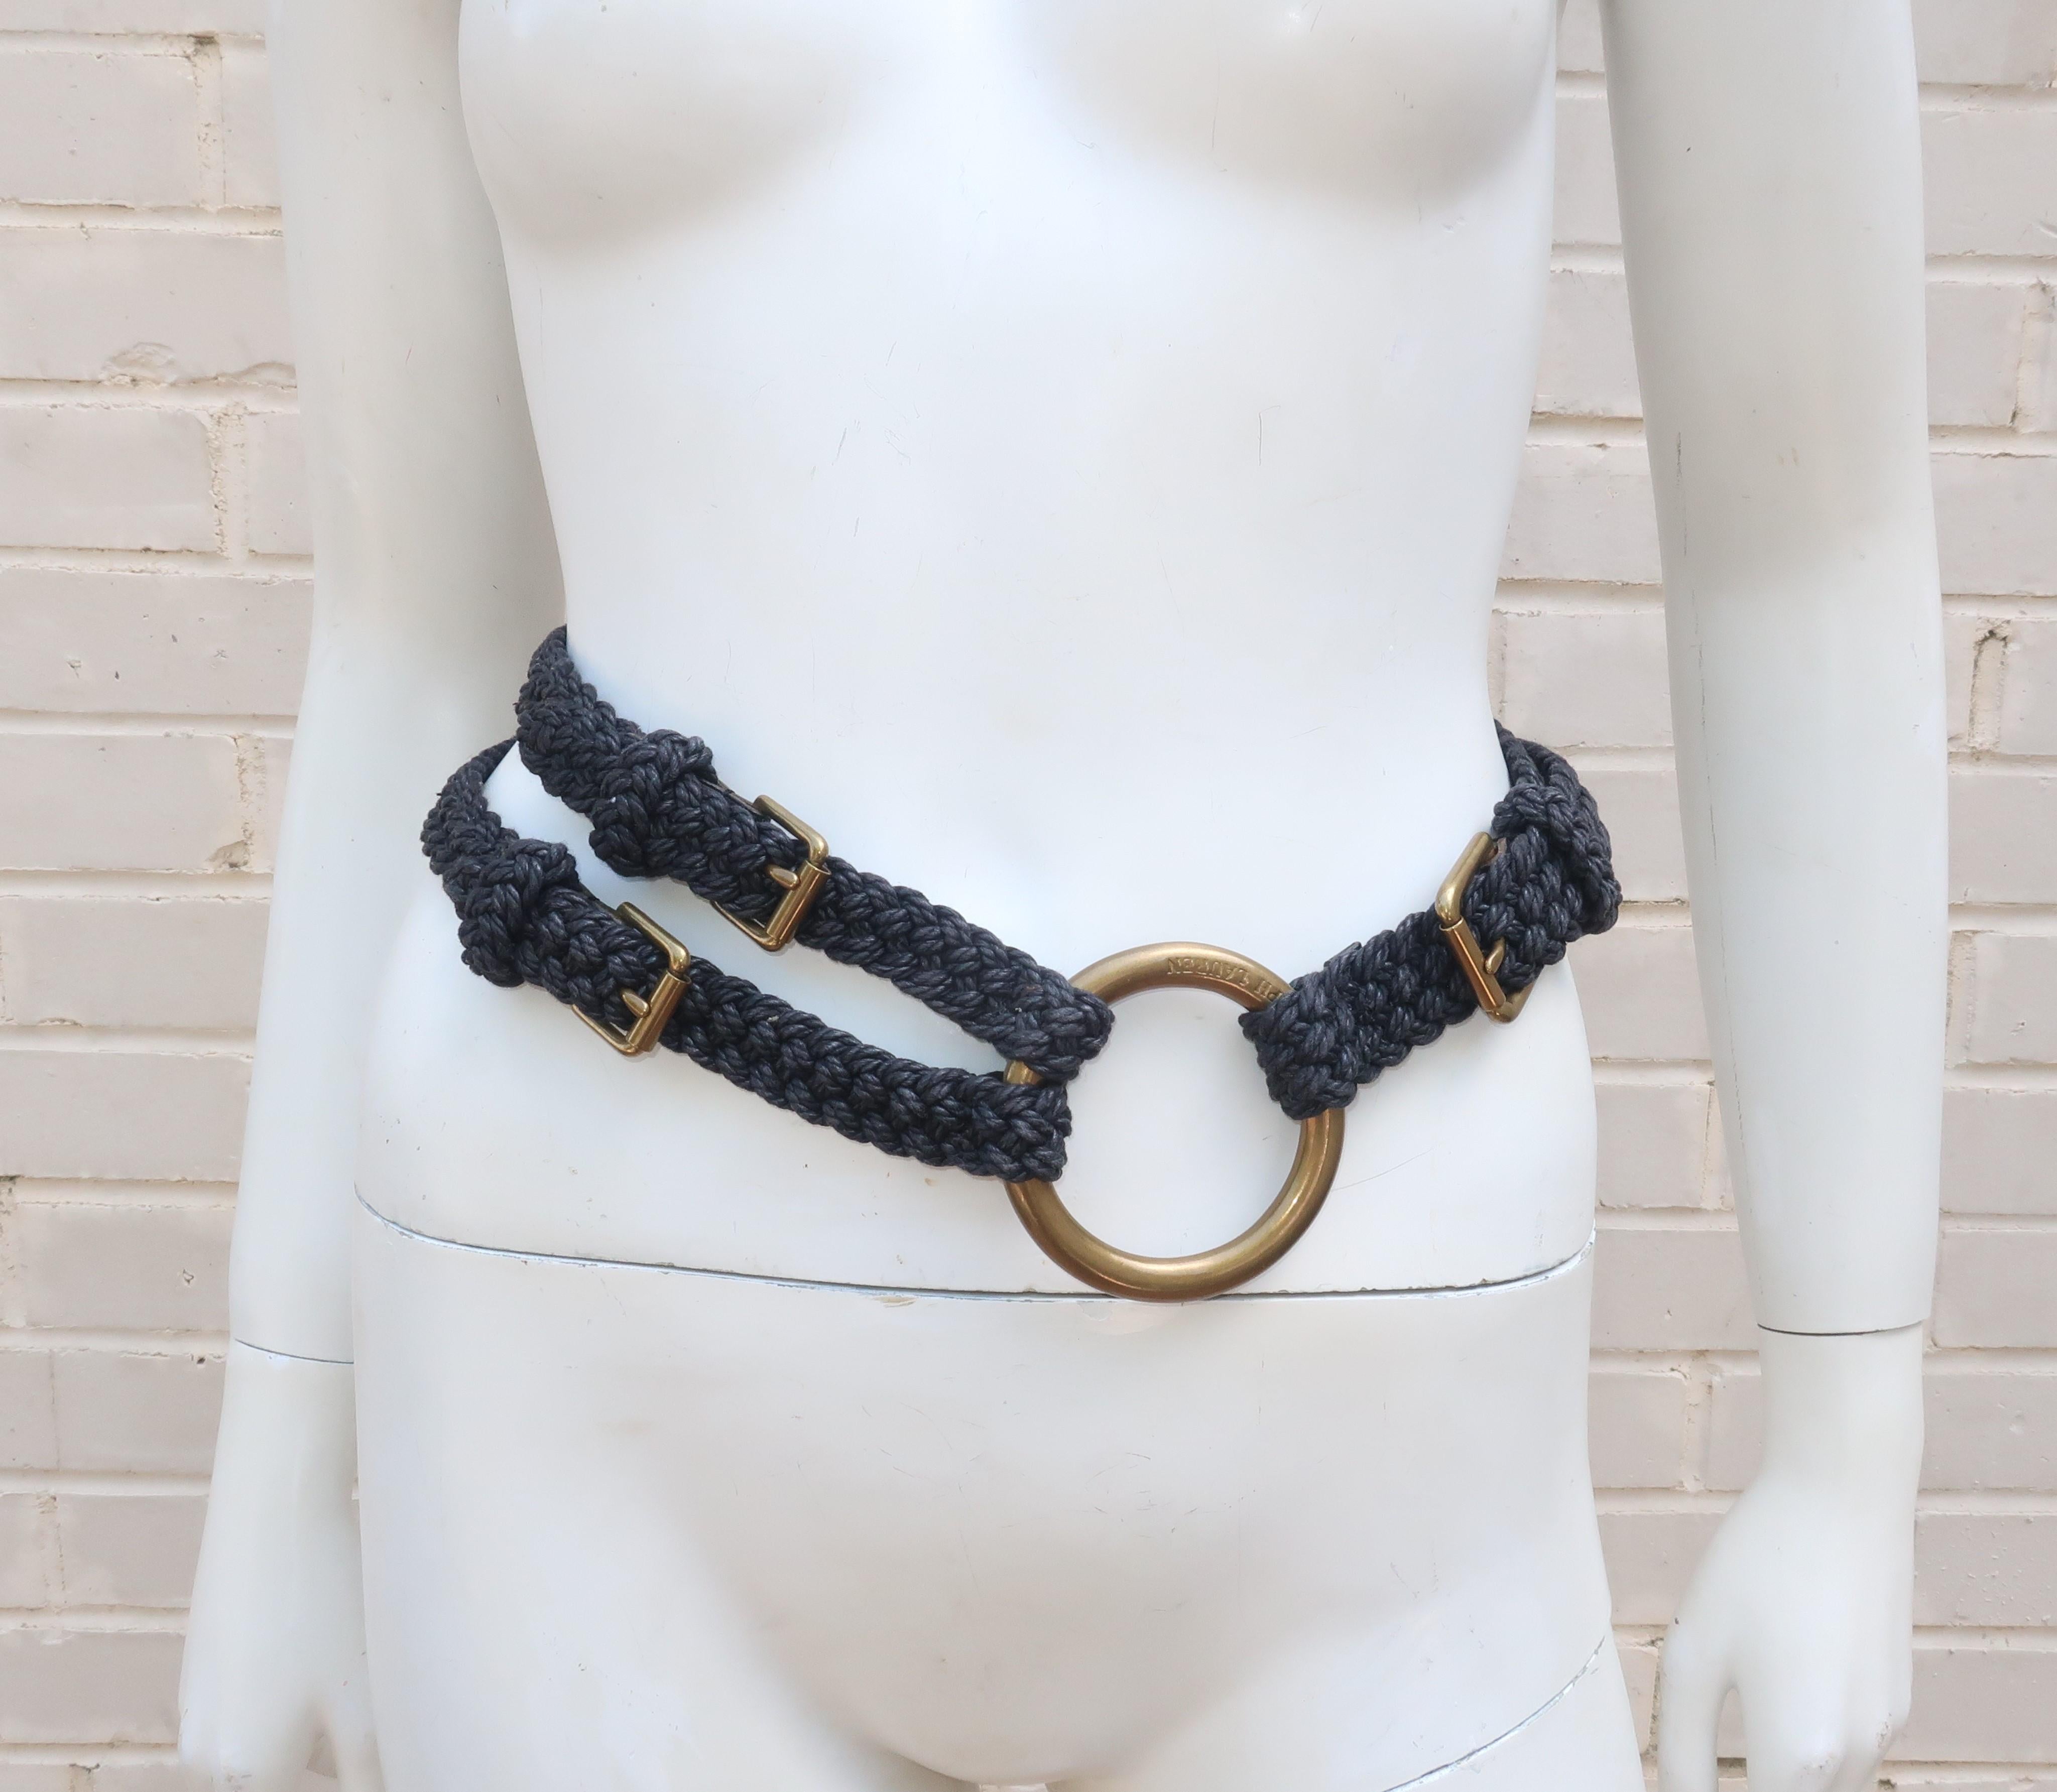 A contemporary Ralph Lauren midnight blue rope belt with a nautical inspiration and large logo embossed brass rings.  The belt features three adjustable leather and brass buckles allowing for wear in a variety of positions including a low slung